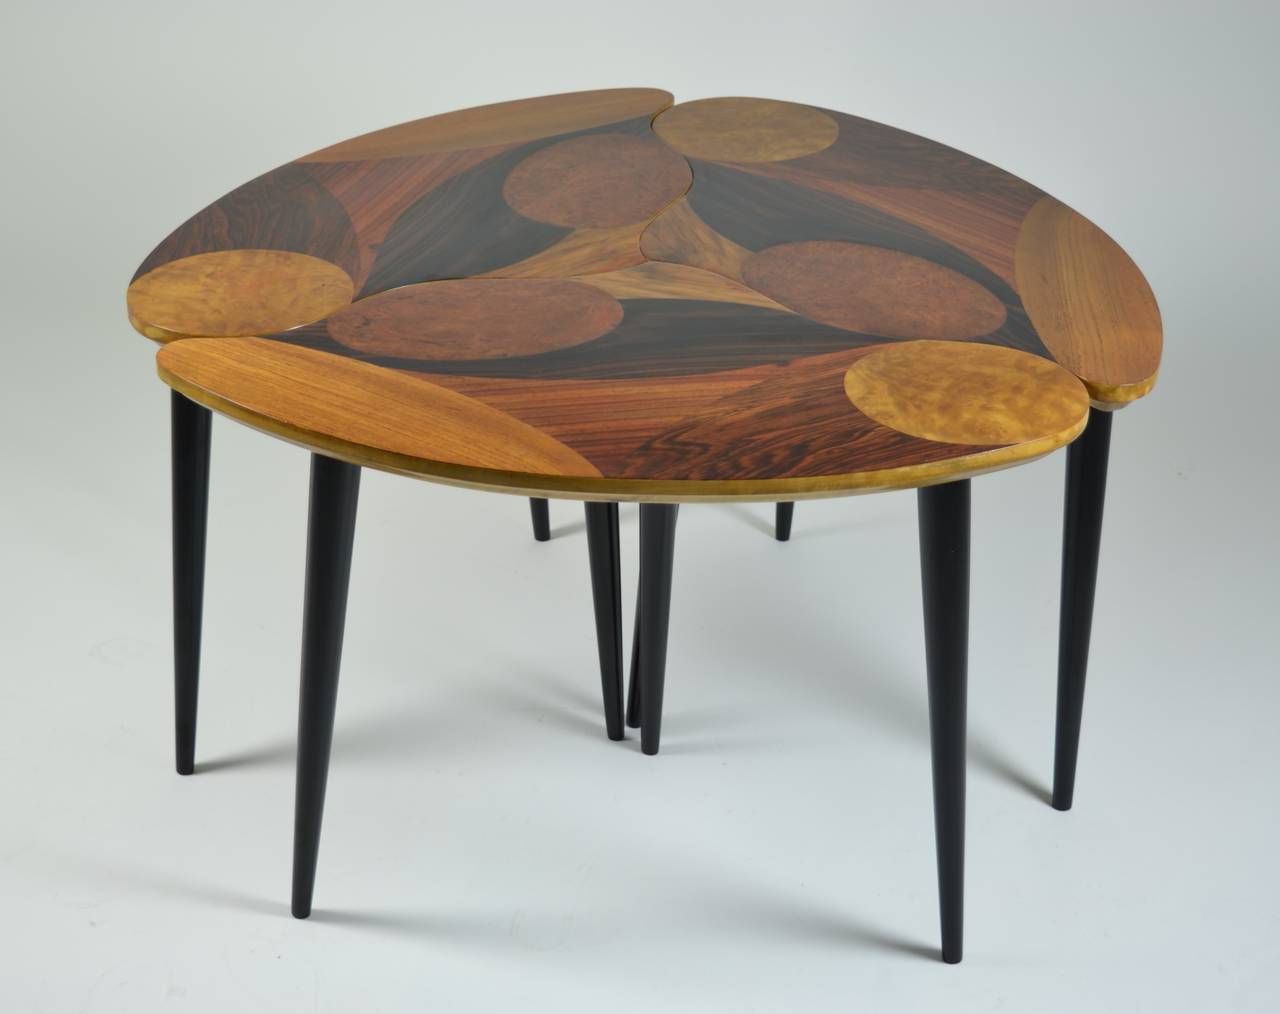 Swedish Modern Three Part Cocktail Table With Specimen Throughout Fashionable Modern Cocktail Tables (View 15 of 20)